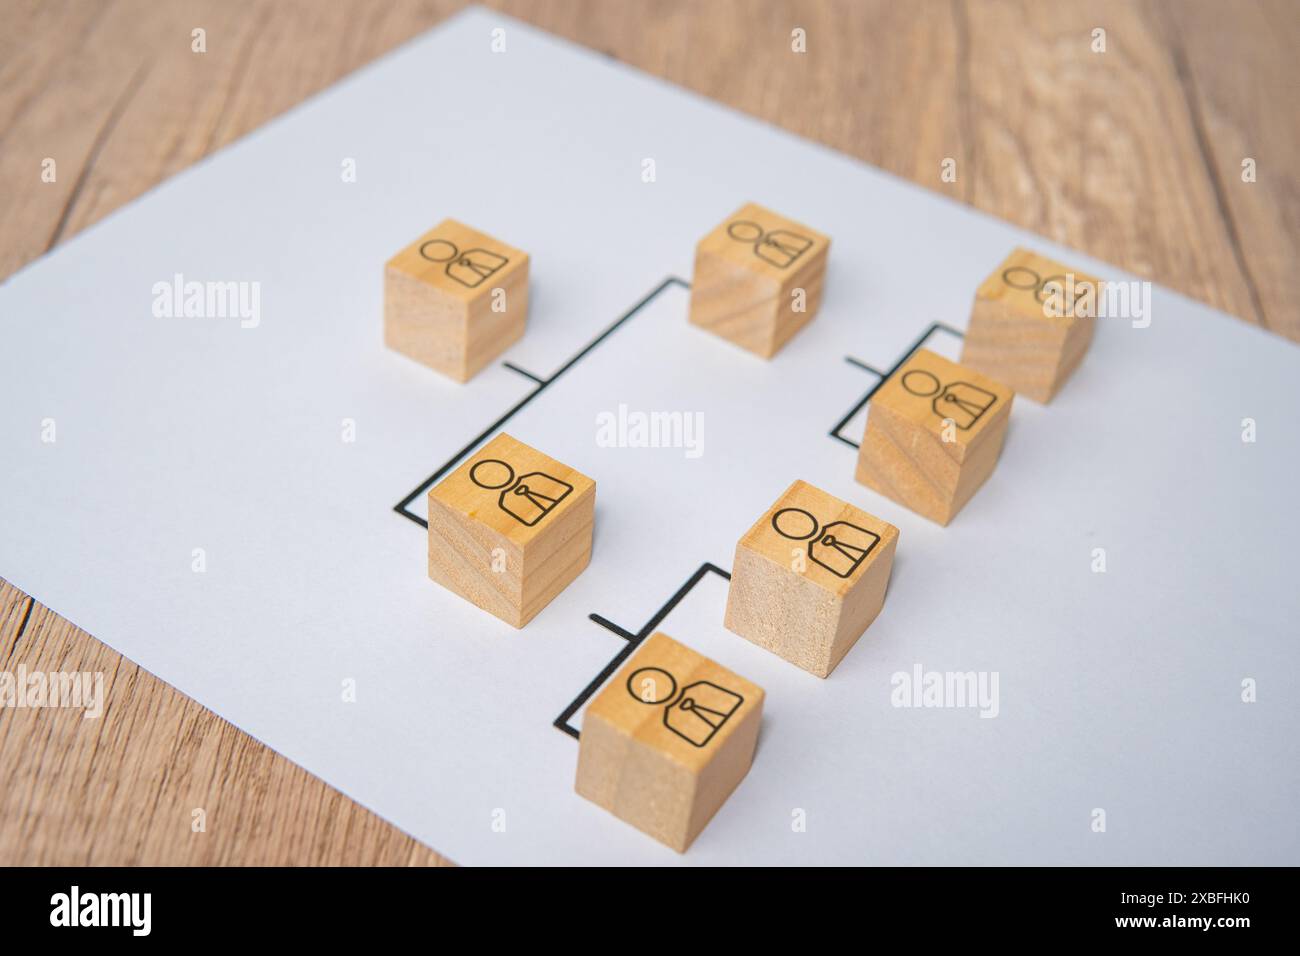 Company hierarchical organizational chart using wooden blocks with copy space. Stock Photo